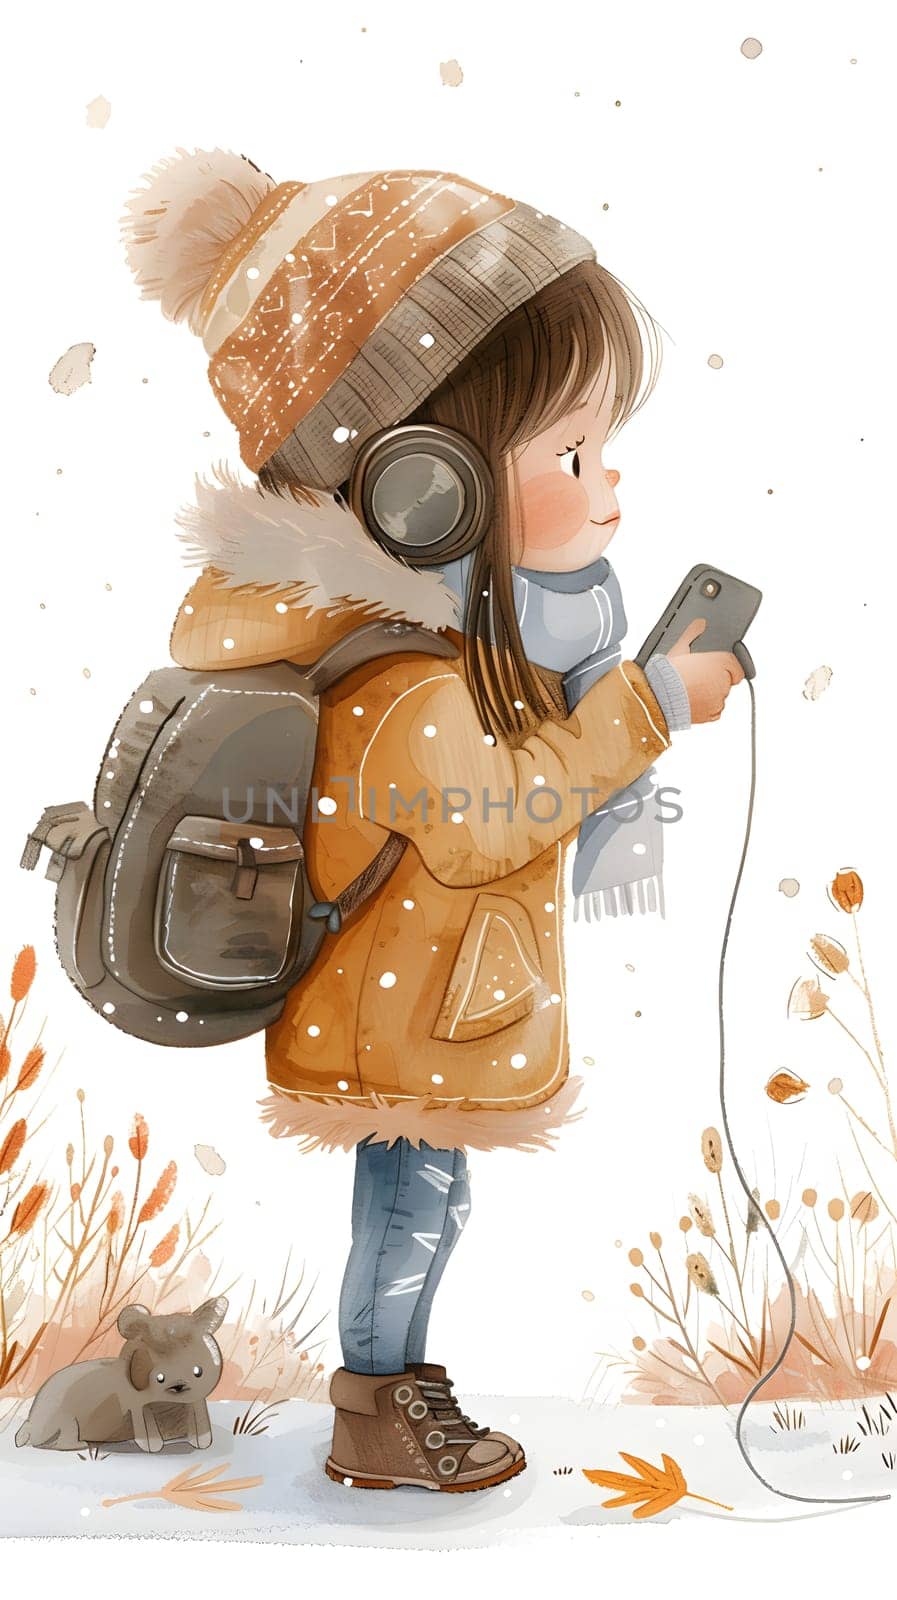 A girl with a helmet, backpack, and headphones holding a phone in the snow by Nadtochiy